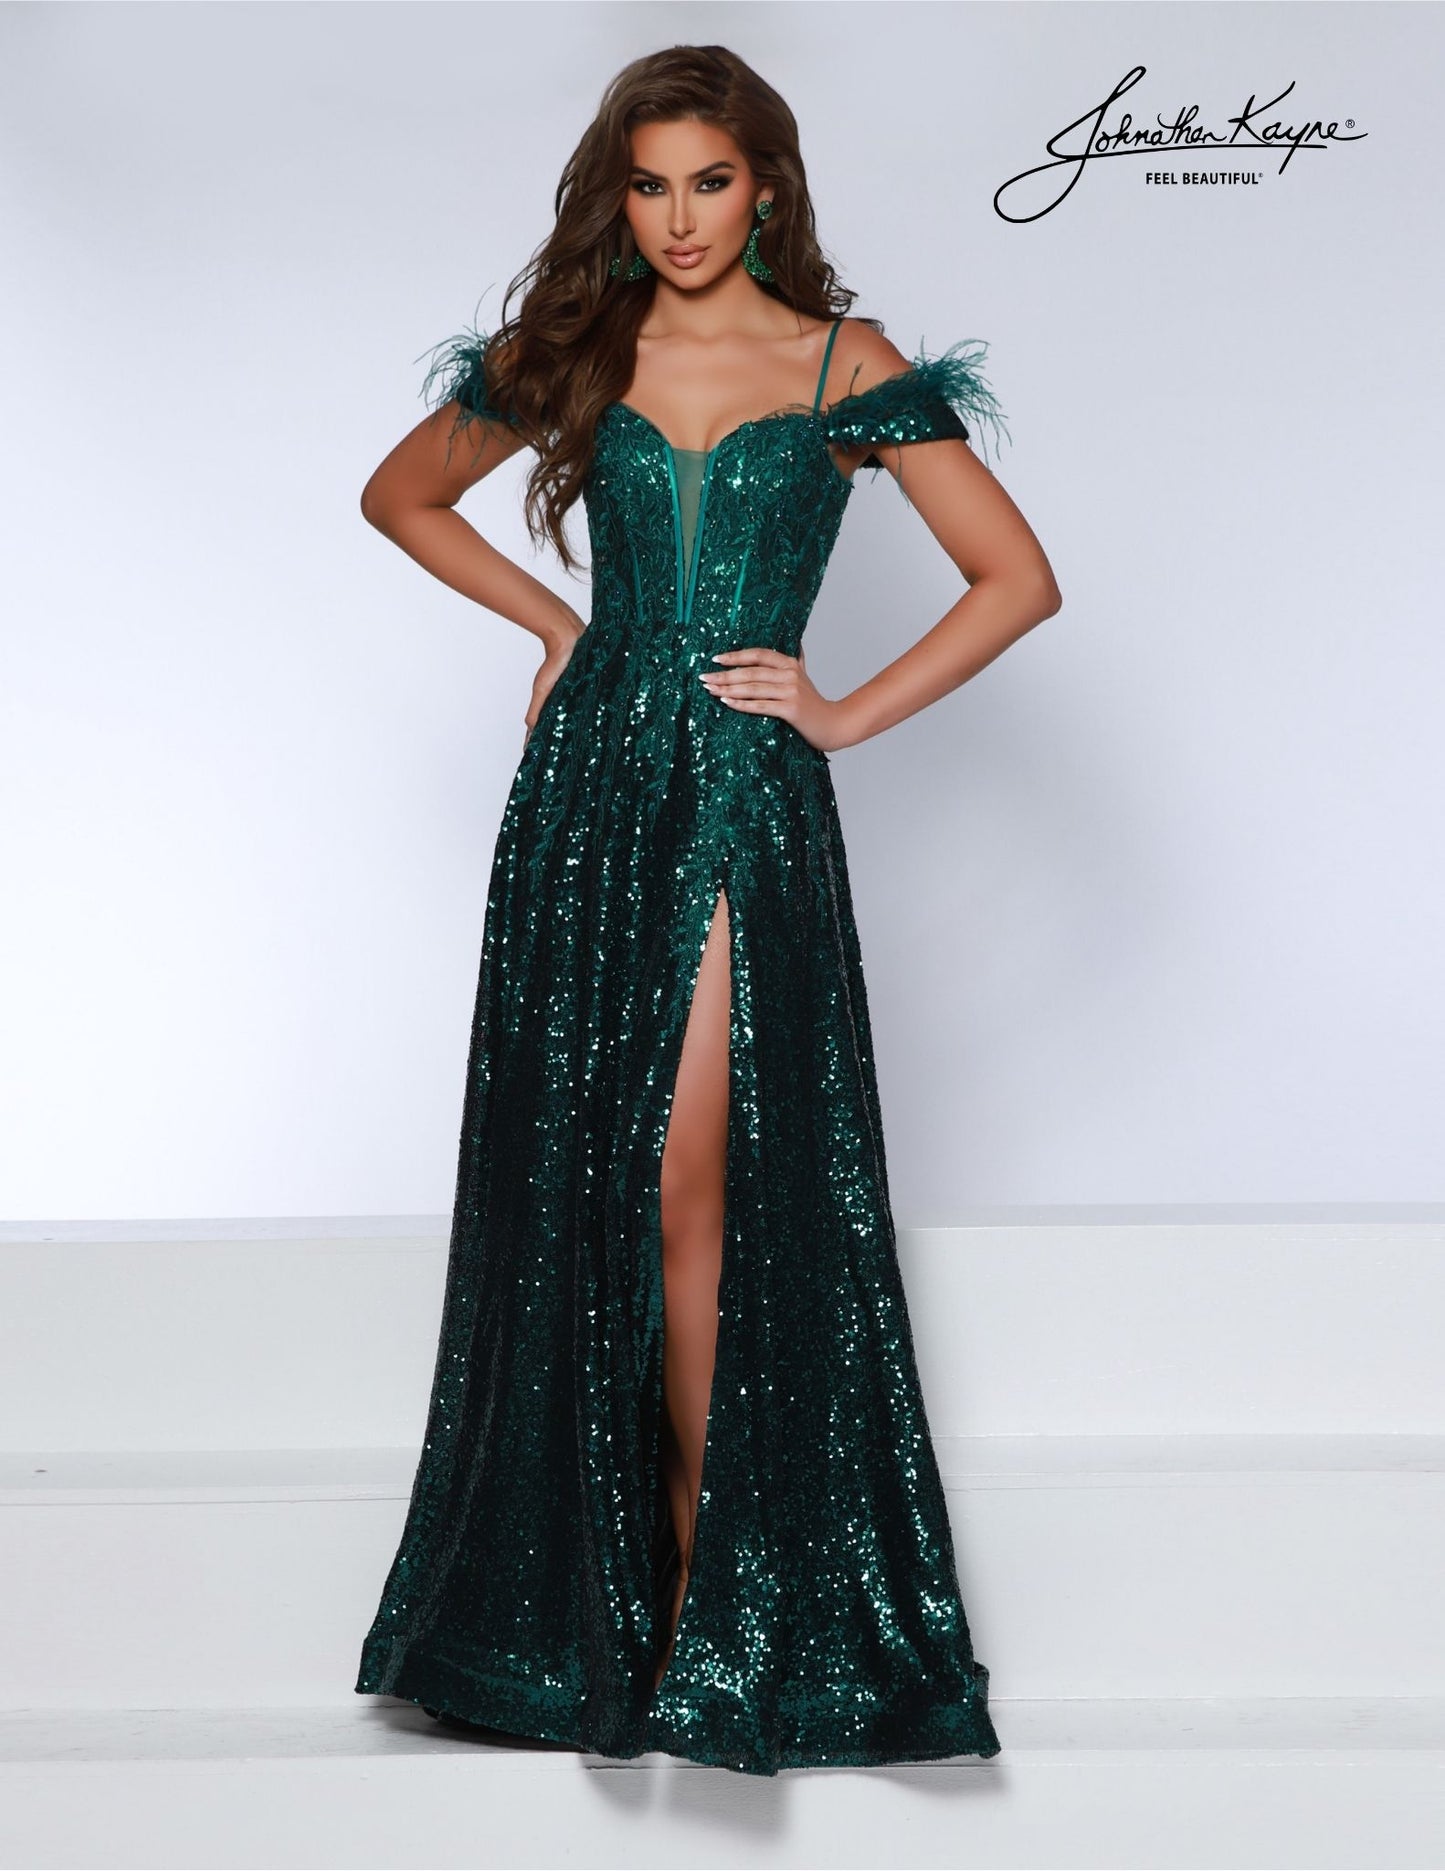 This Johnathan Kayne 2887 gown features a stunning feather and sequin design, with a maxi slit and corset lace detailing for a dramatic and elegant look. Perfect for a prom or formal occasion, this dress is sure to make a statement and turn heads. Ensure you are the talk of the town in this sequin mesh A-line gown featuring a thigh high slit and pockets.